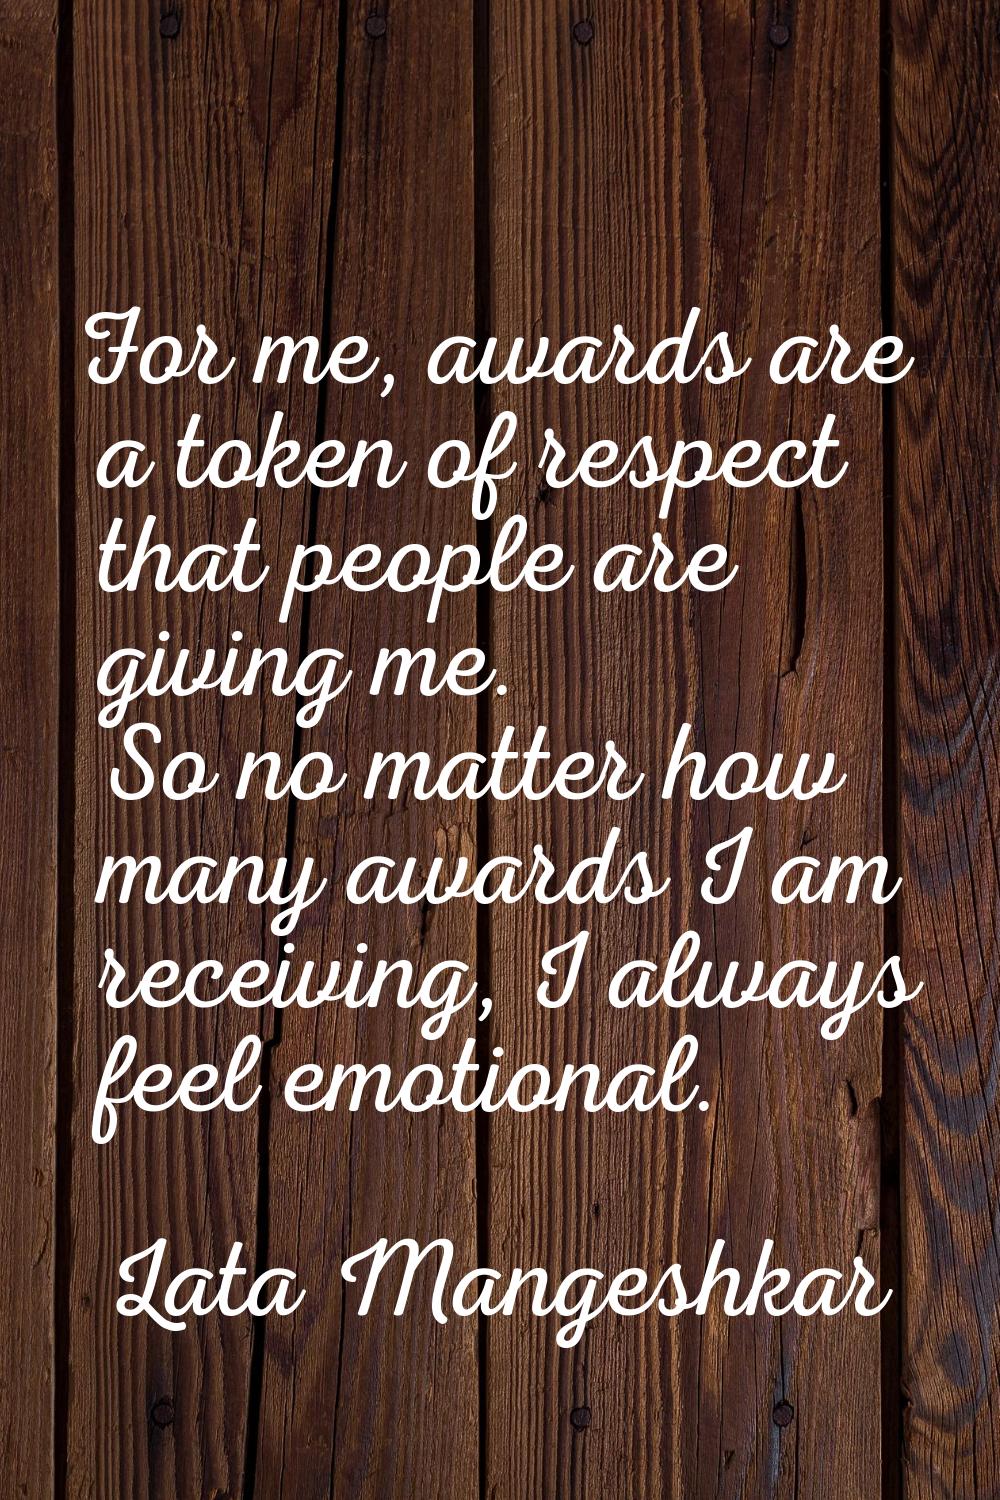 For me, awards are a token of respect that people are giving me. So no matter how many awards I am 